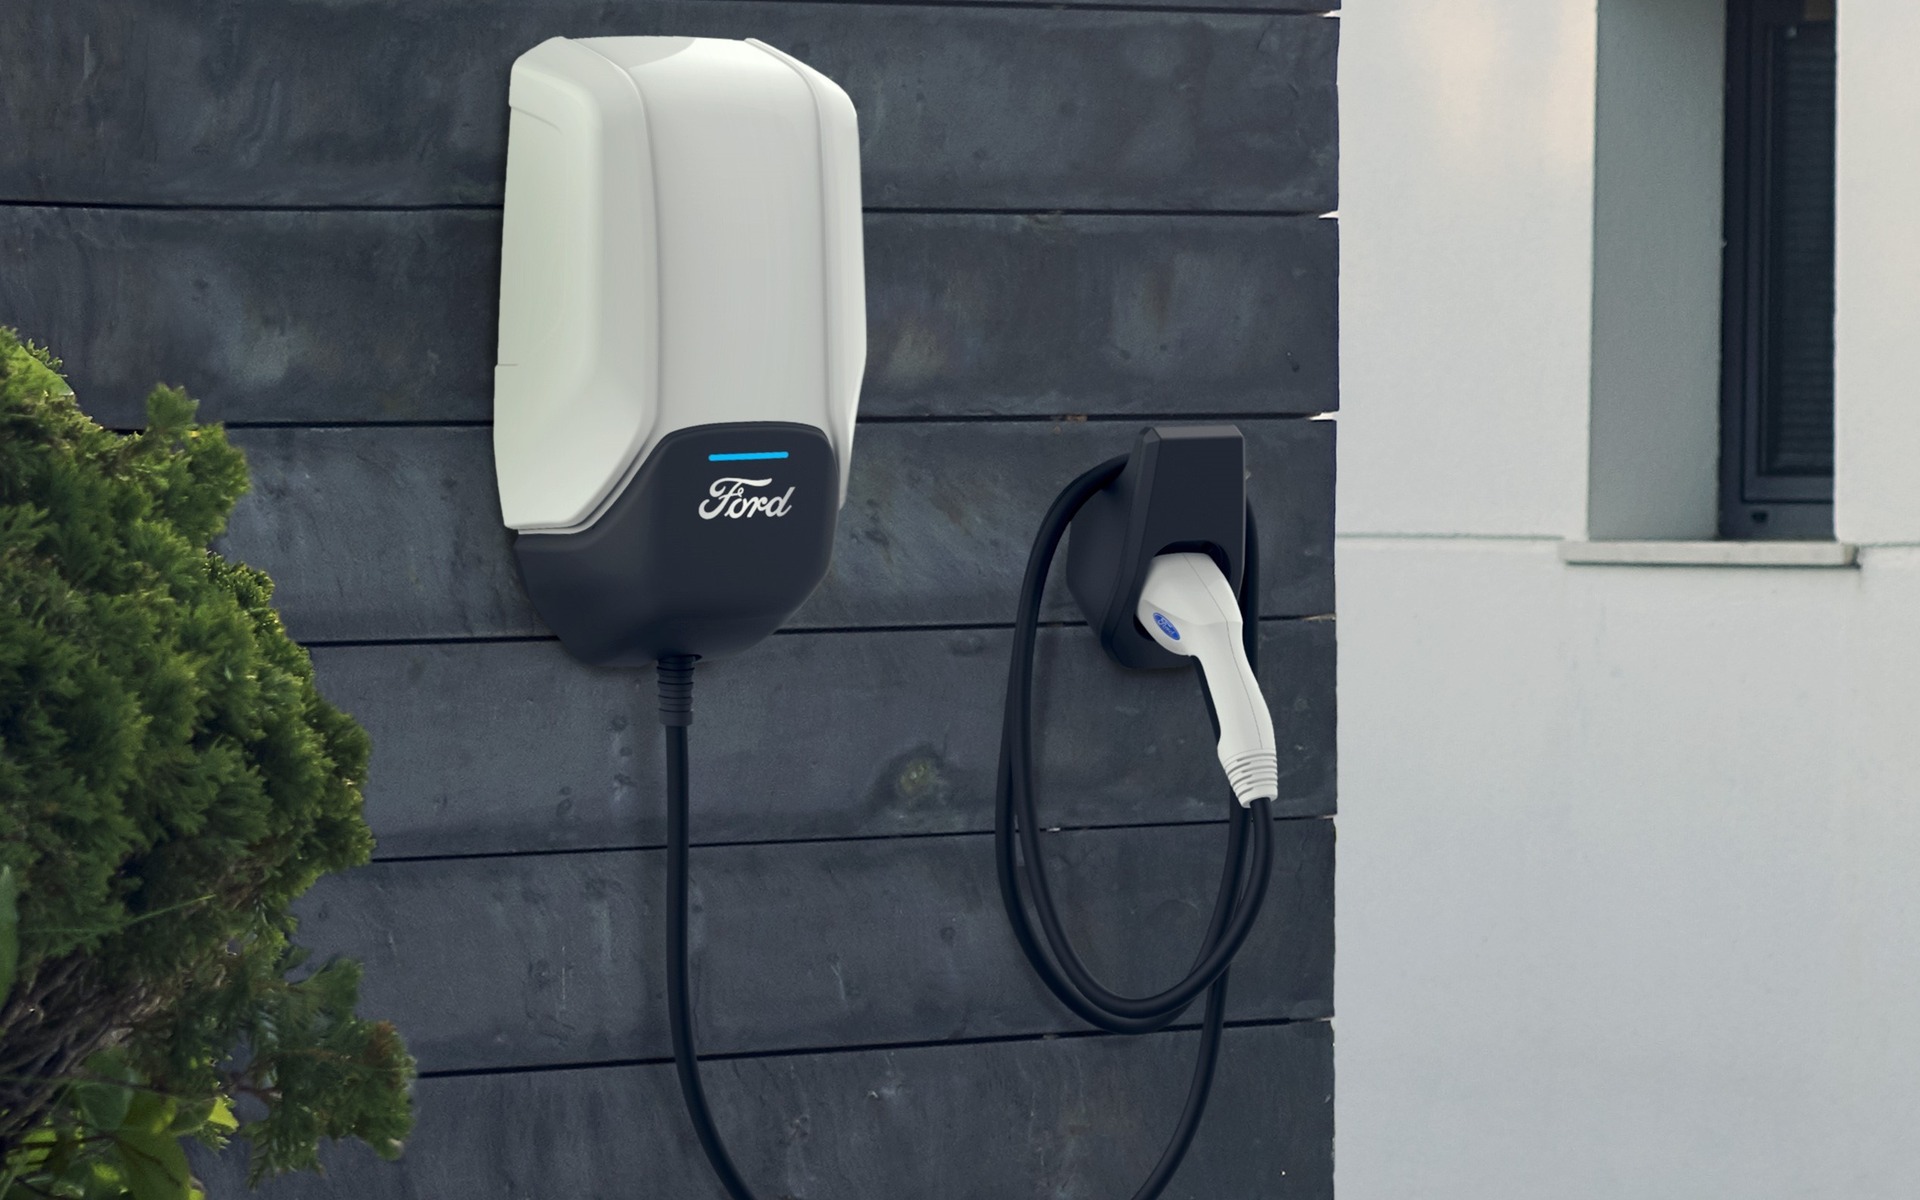 Ford Announces Free Charging at Over 12,000 Stations - The Car Guide